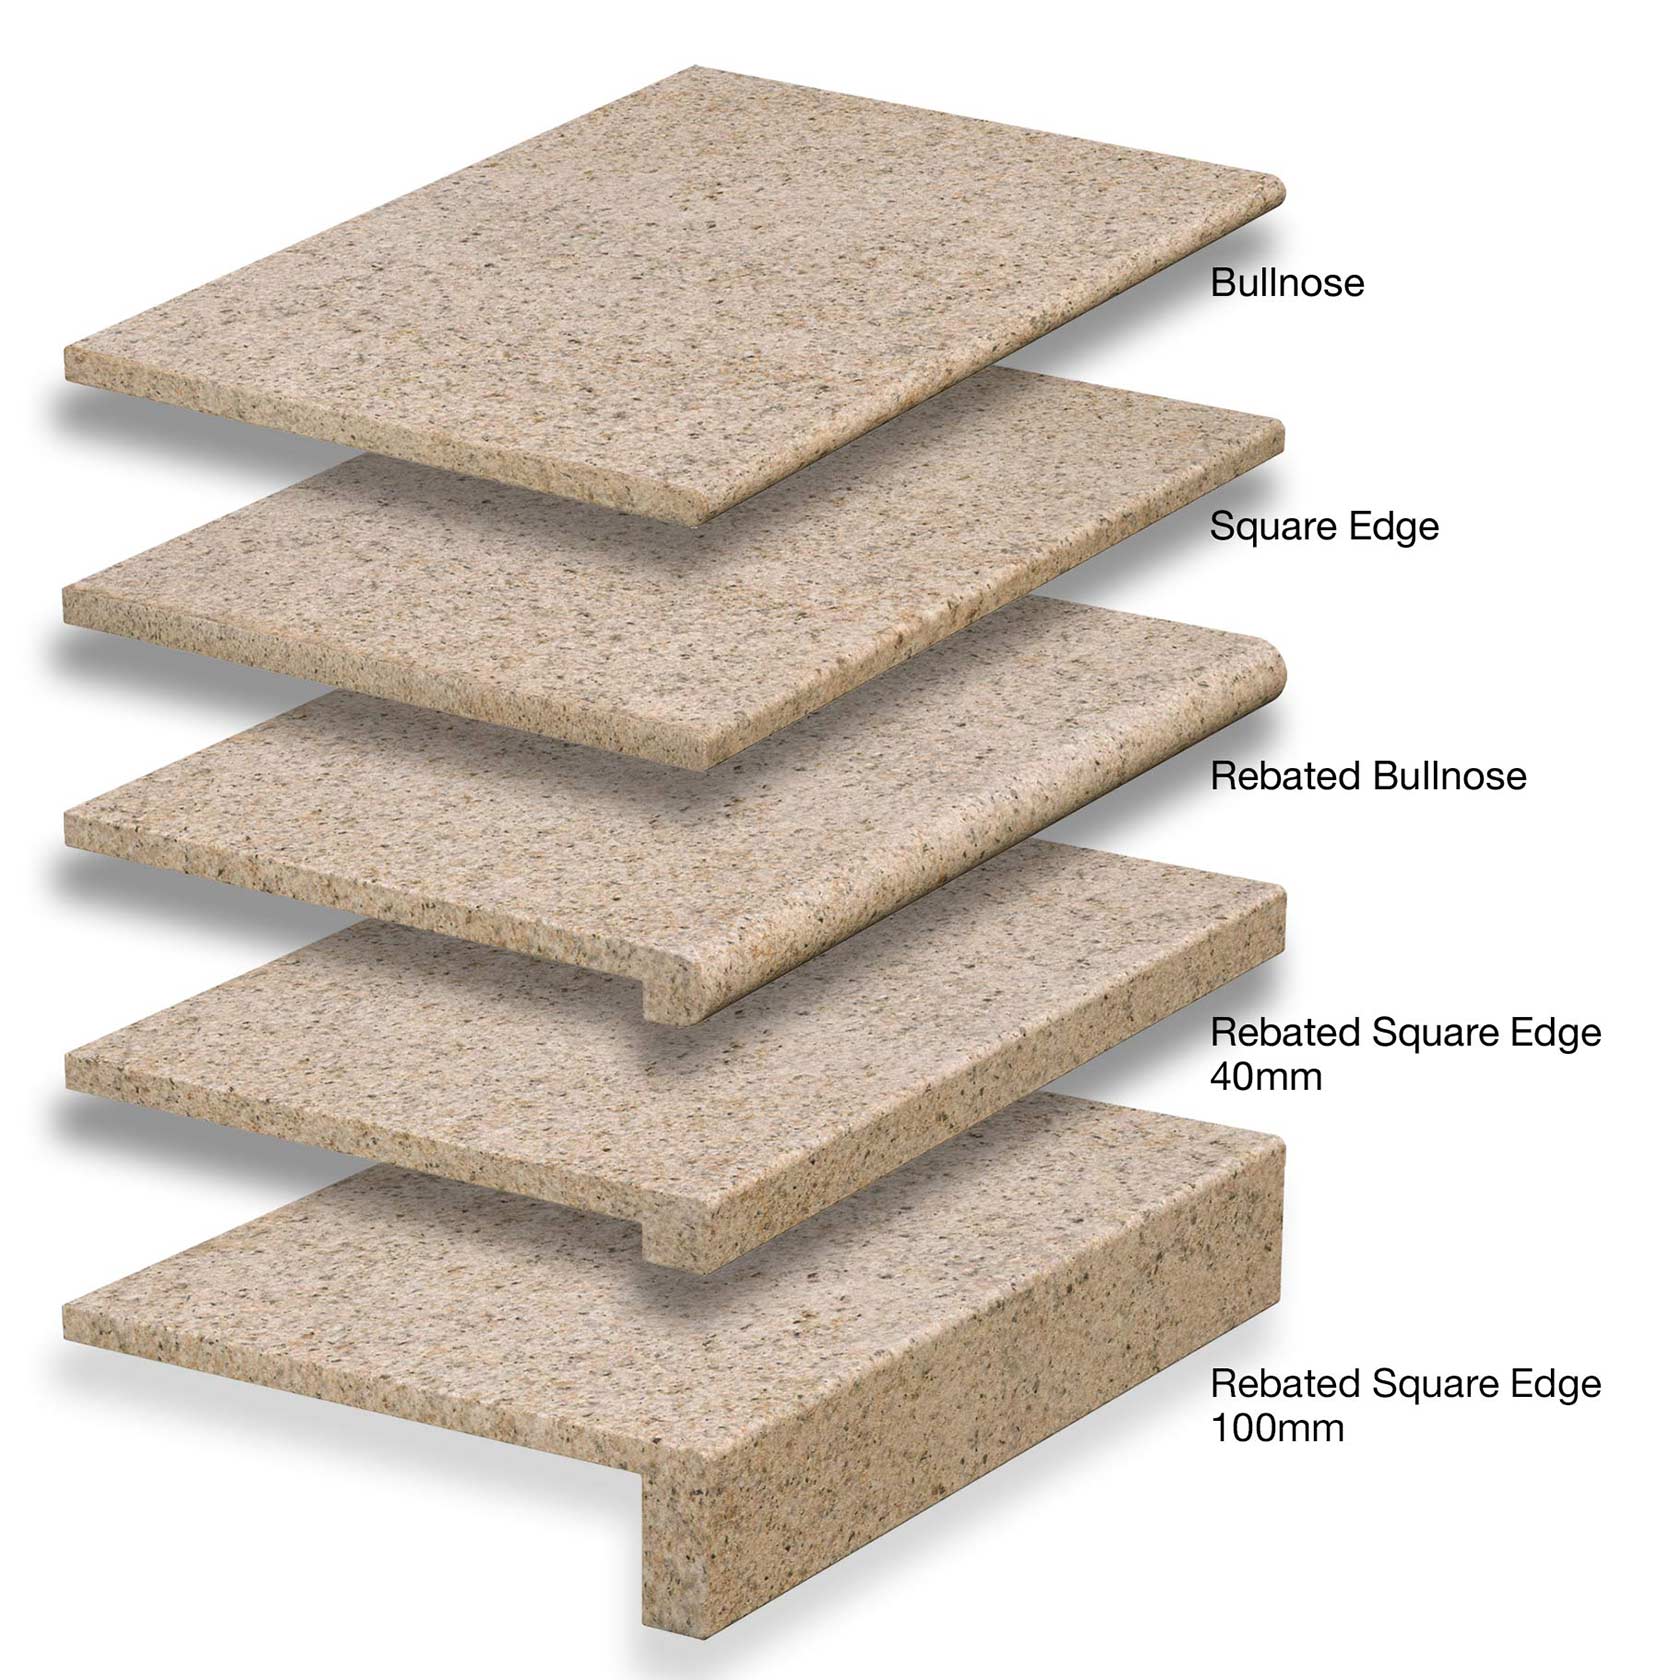 Almond Granite Coping options with descriptions